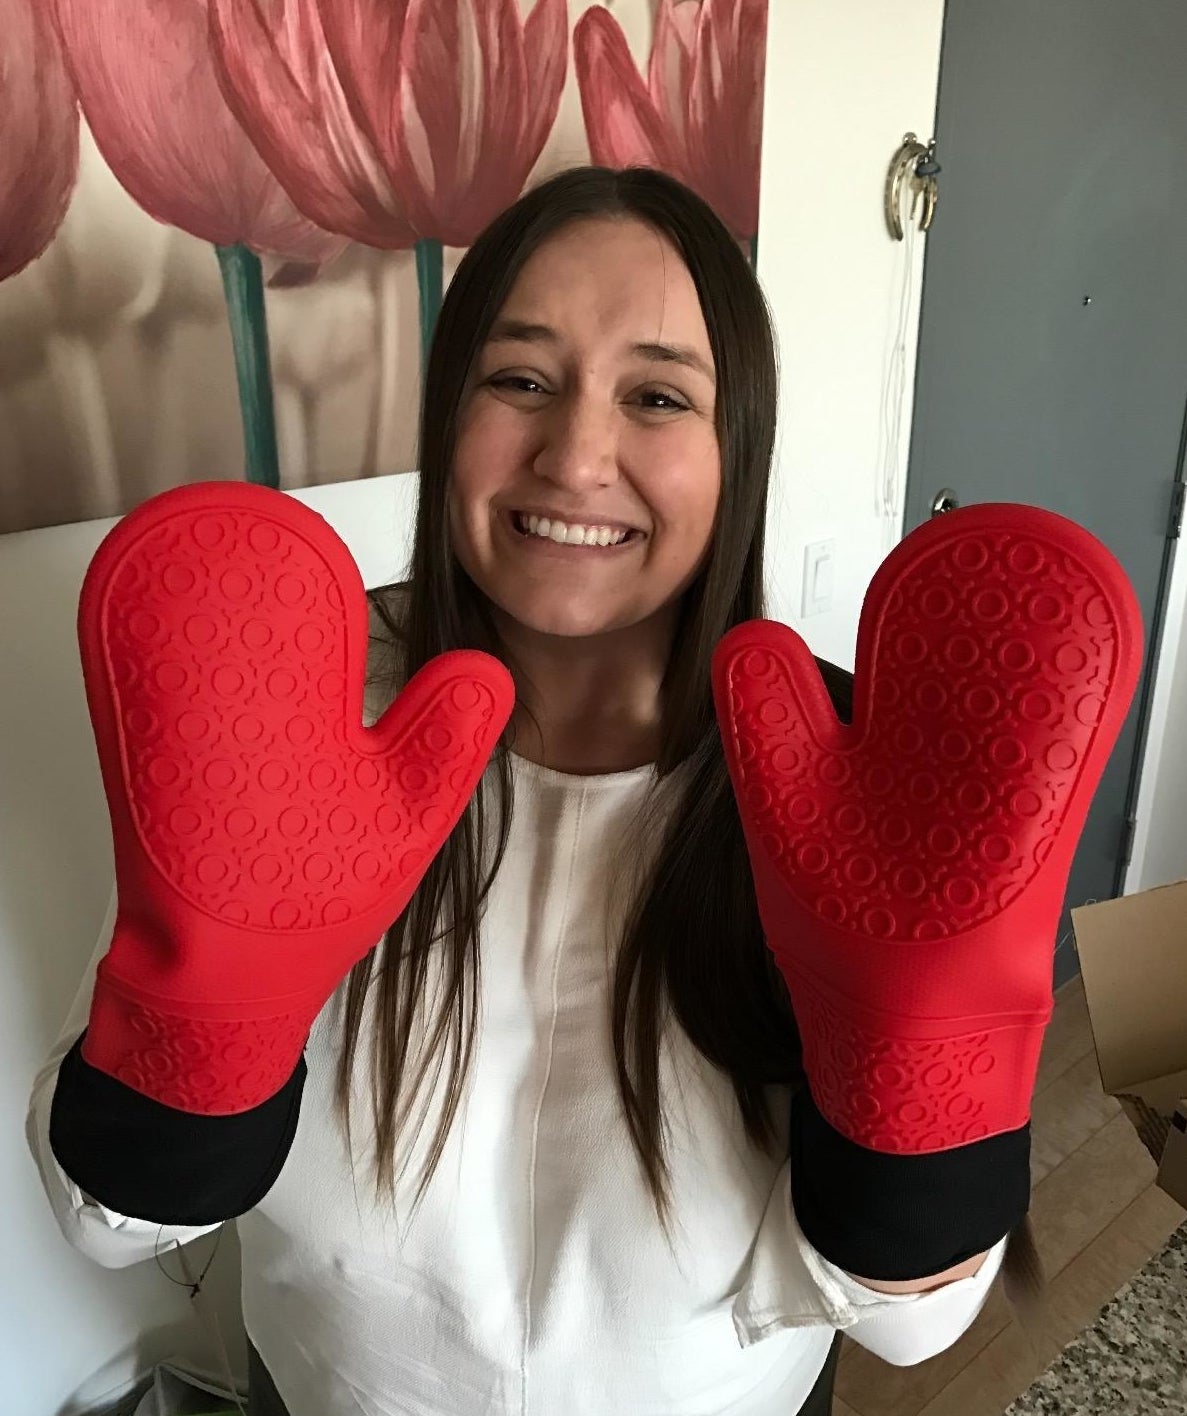 Smiling person holding up hands wearing large red silicone oven mitts